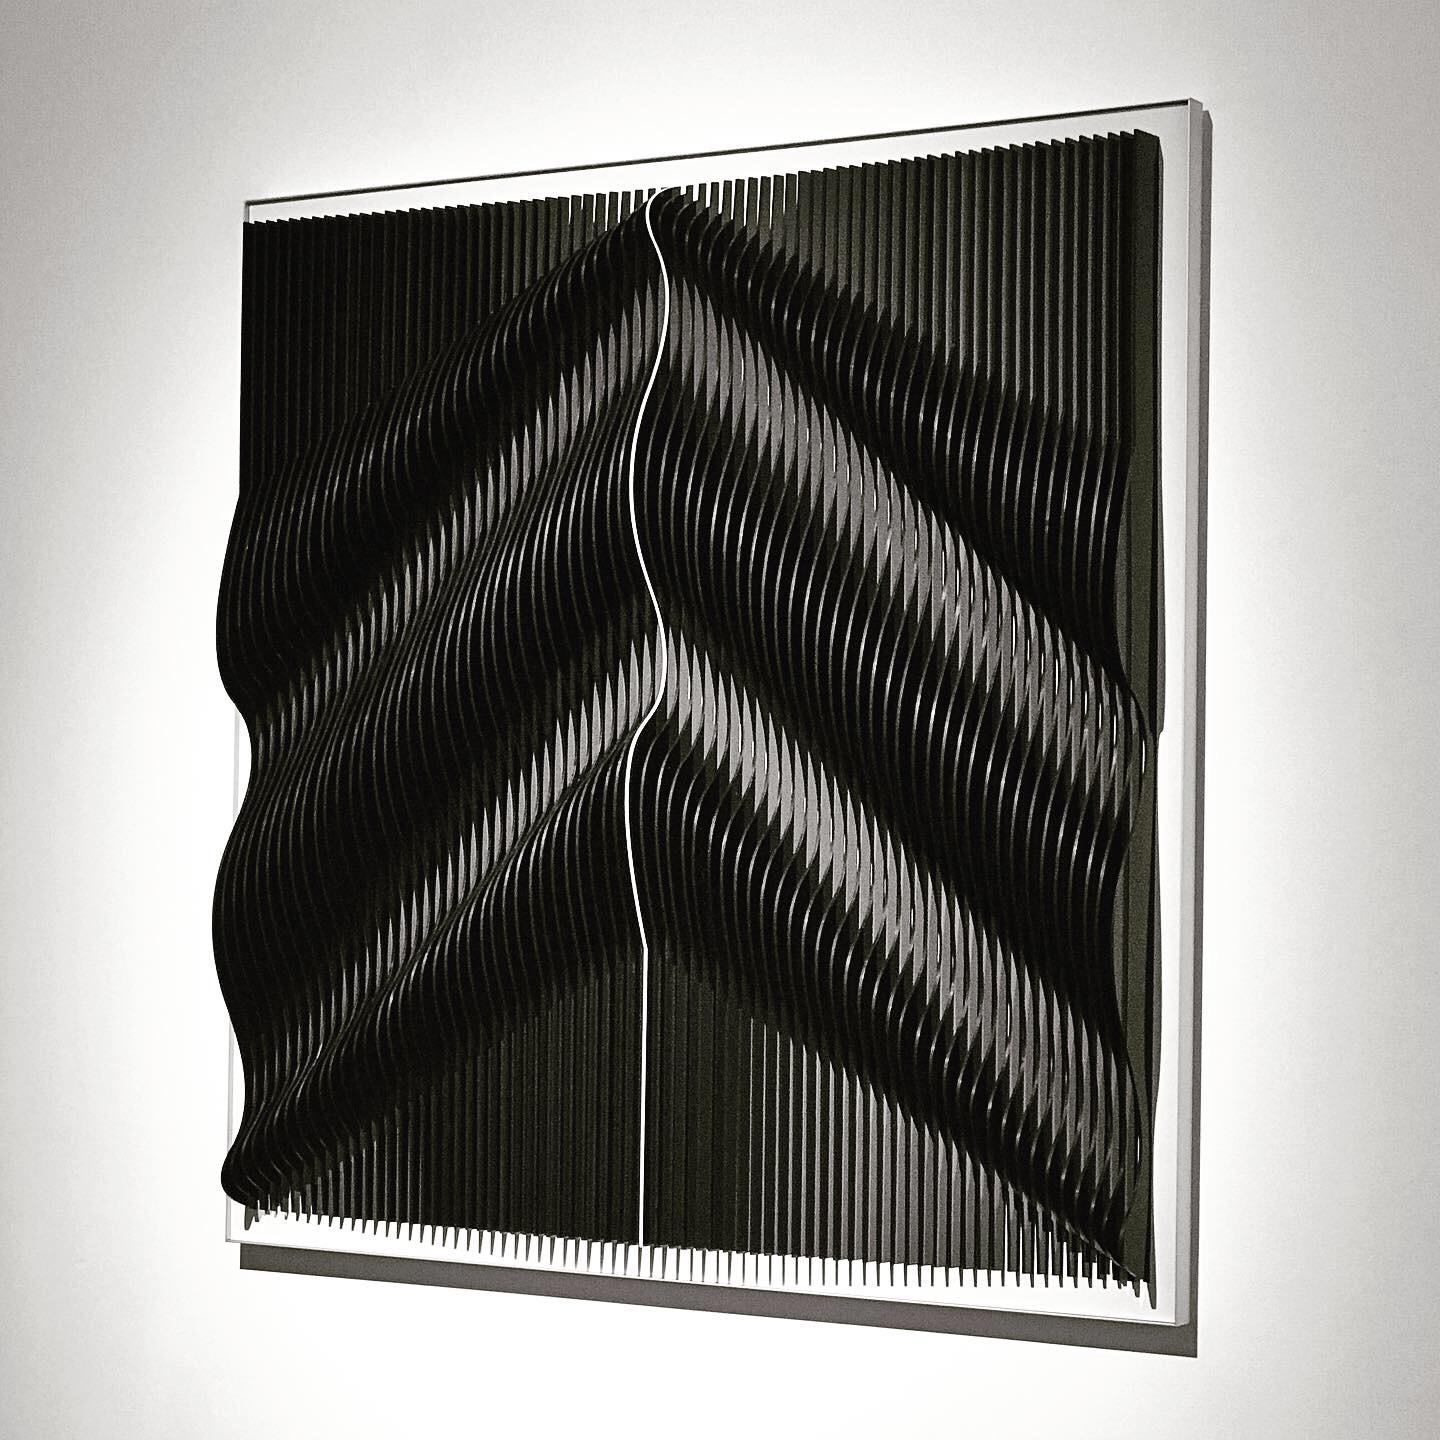 Telluric White - kinetic abstract wall sculpture by J. Margulis